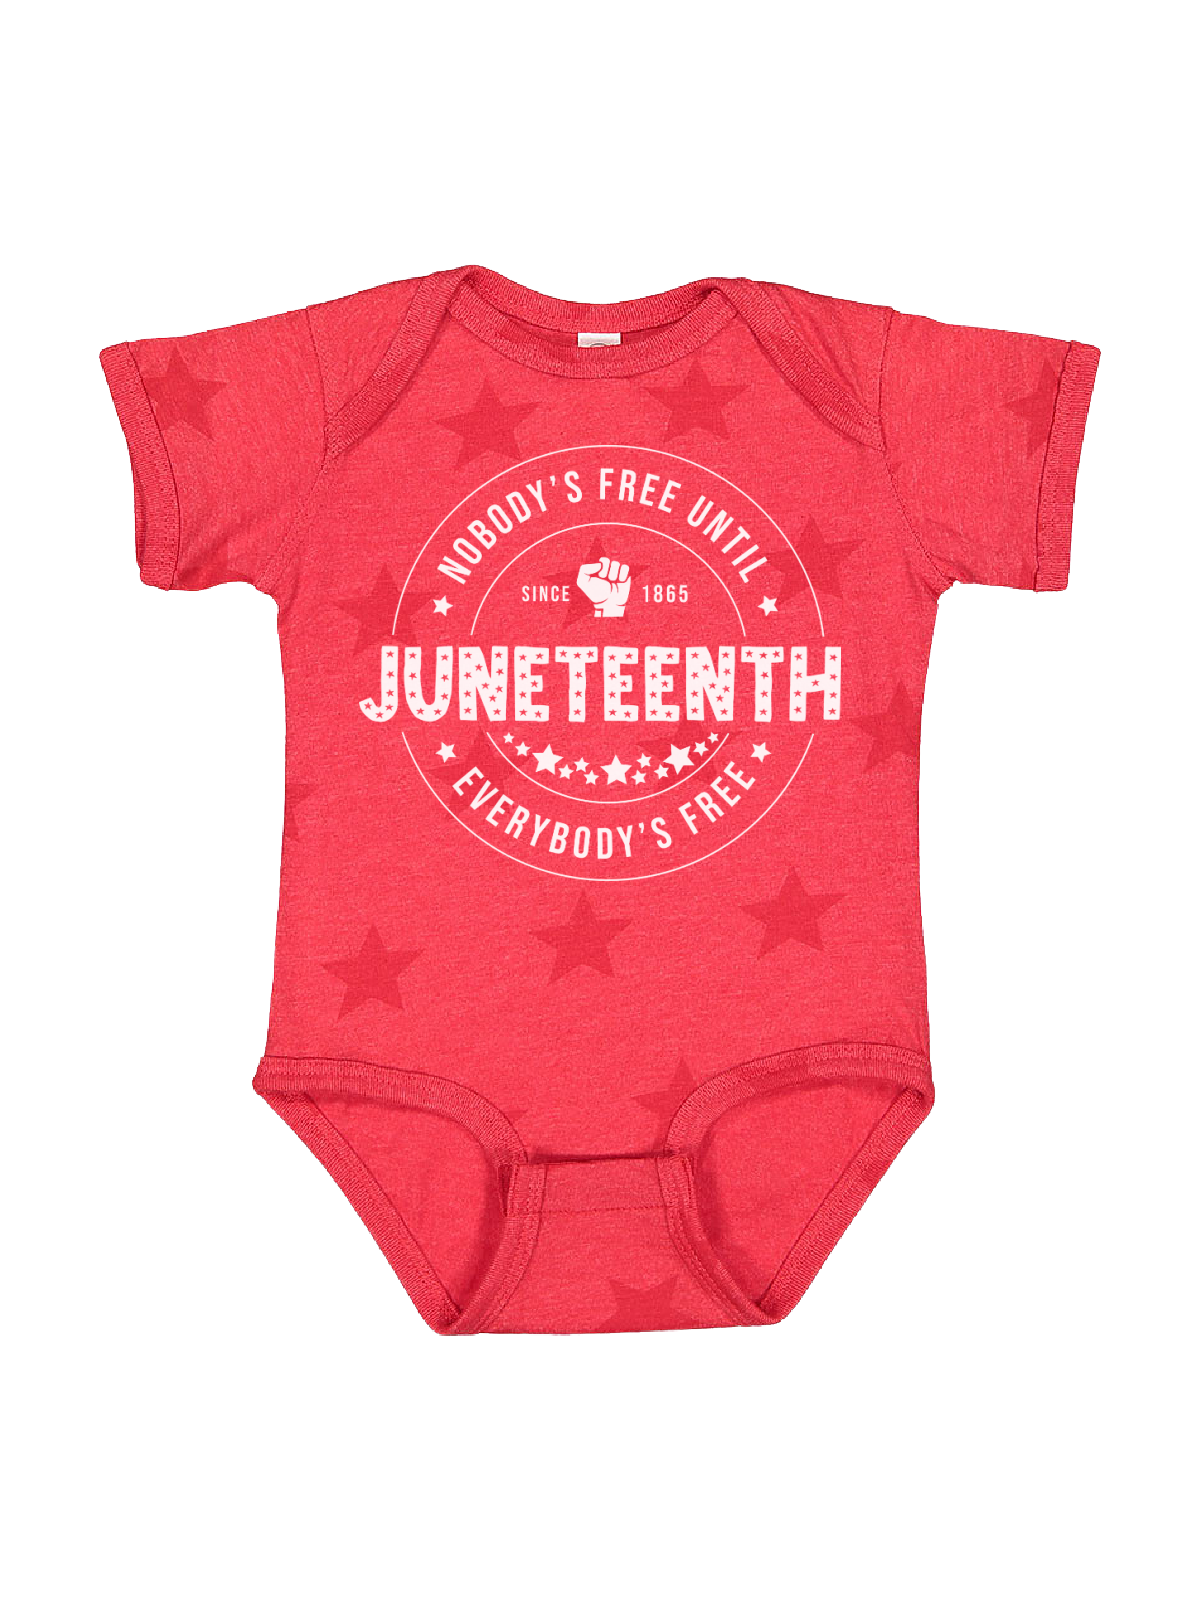 Nobody's Free Until Everybody's Free Infant Bodysuit in Red Stars